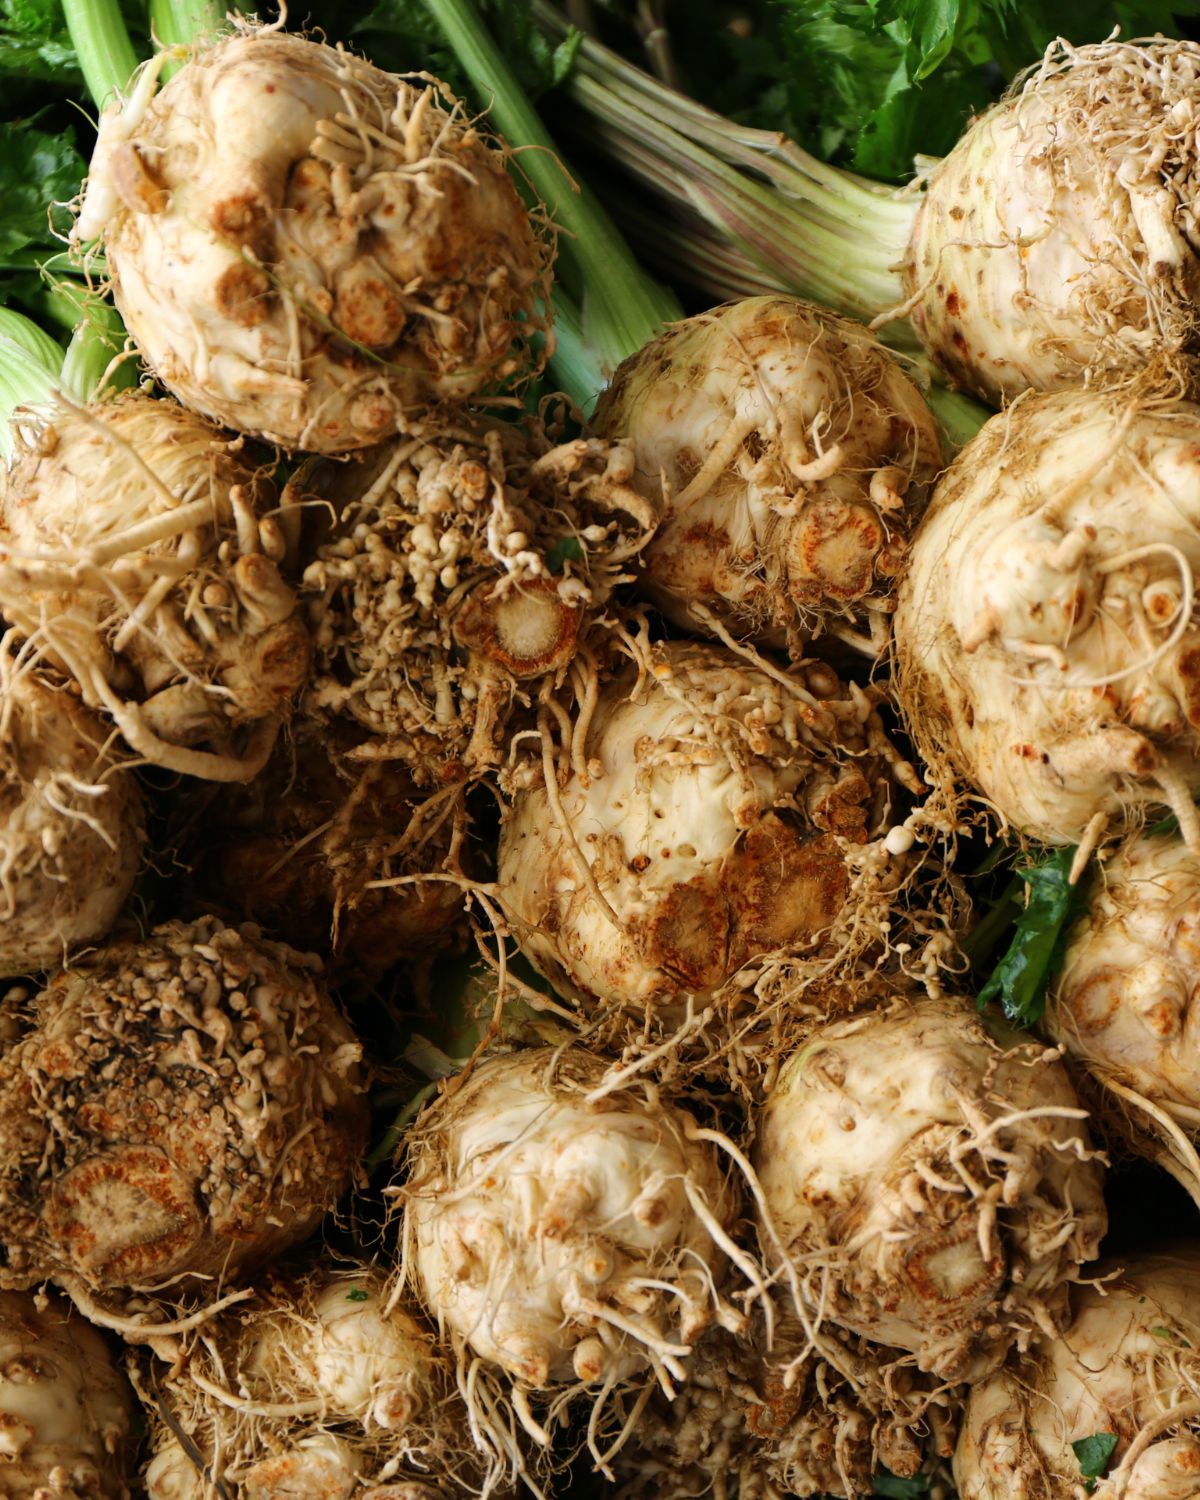 Many celeriac with roots hanging off them and stalks of celery attached.